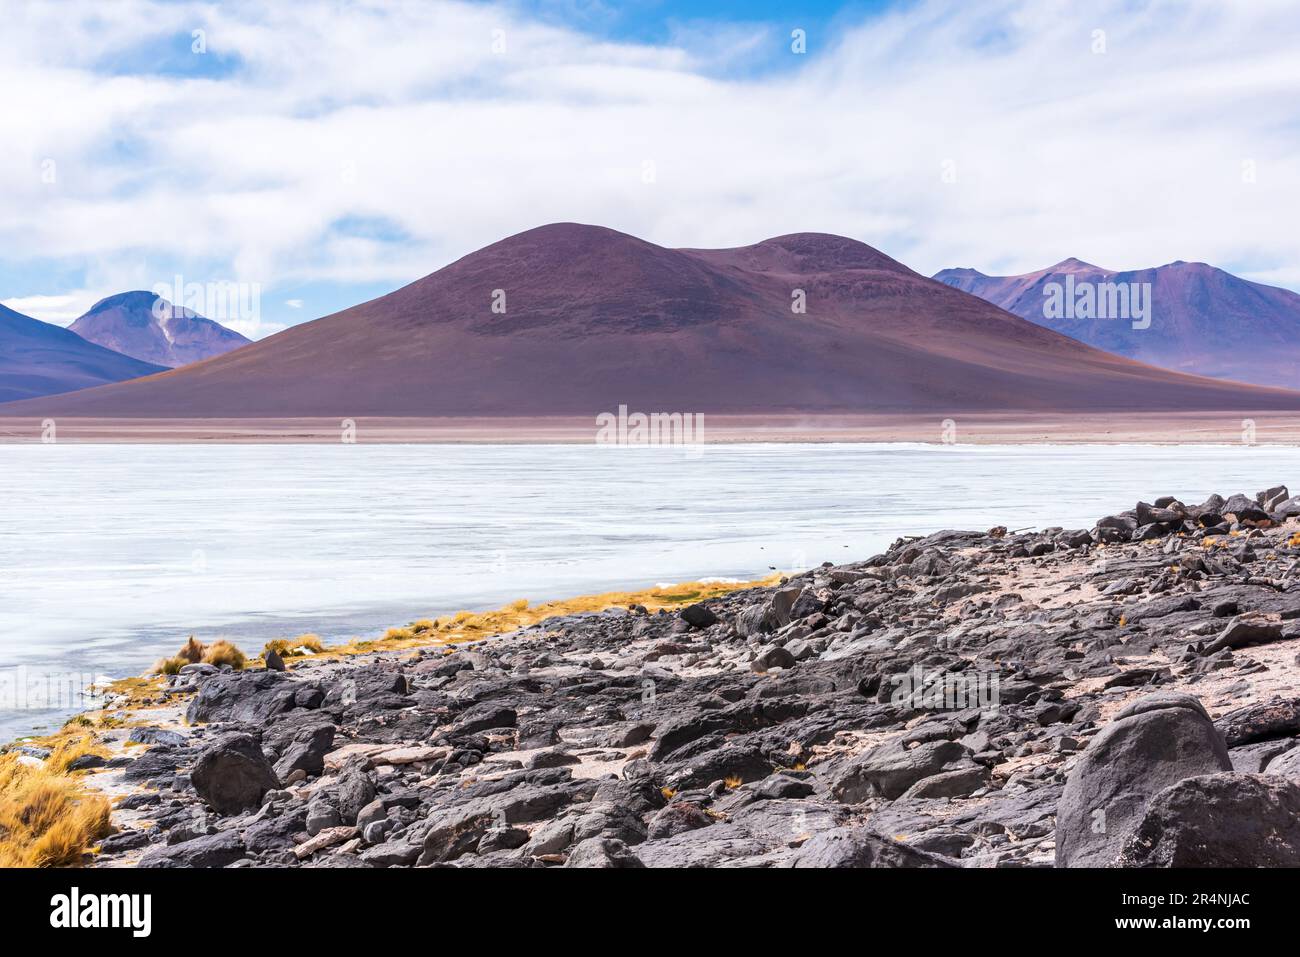 Andes mountain range viewed from frozen lake in the bolivian plateau Stock Photo